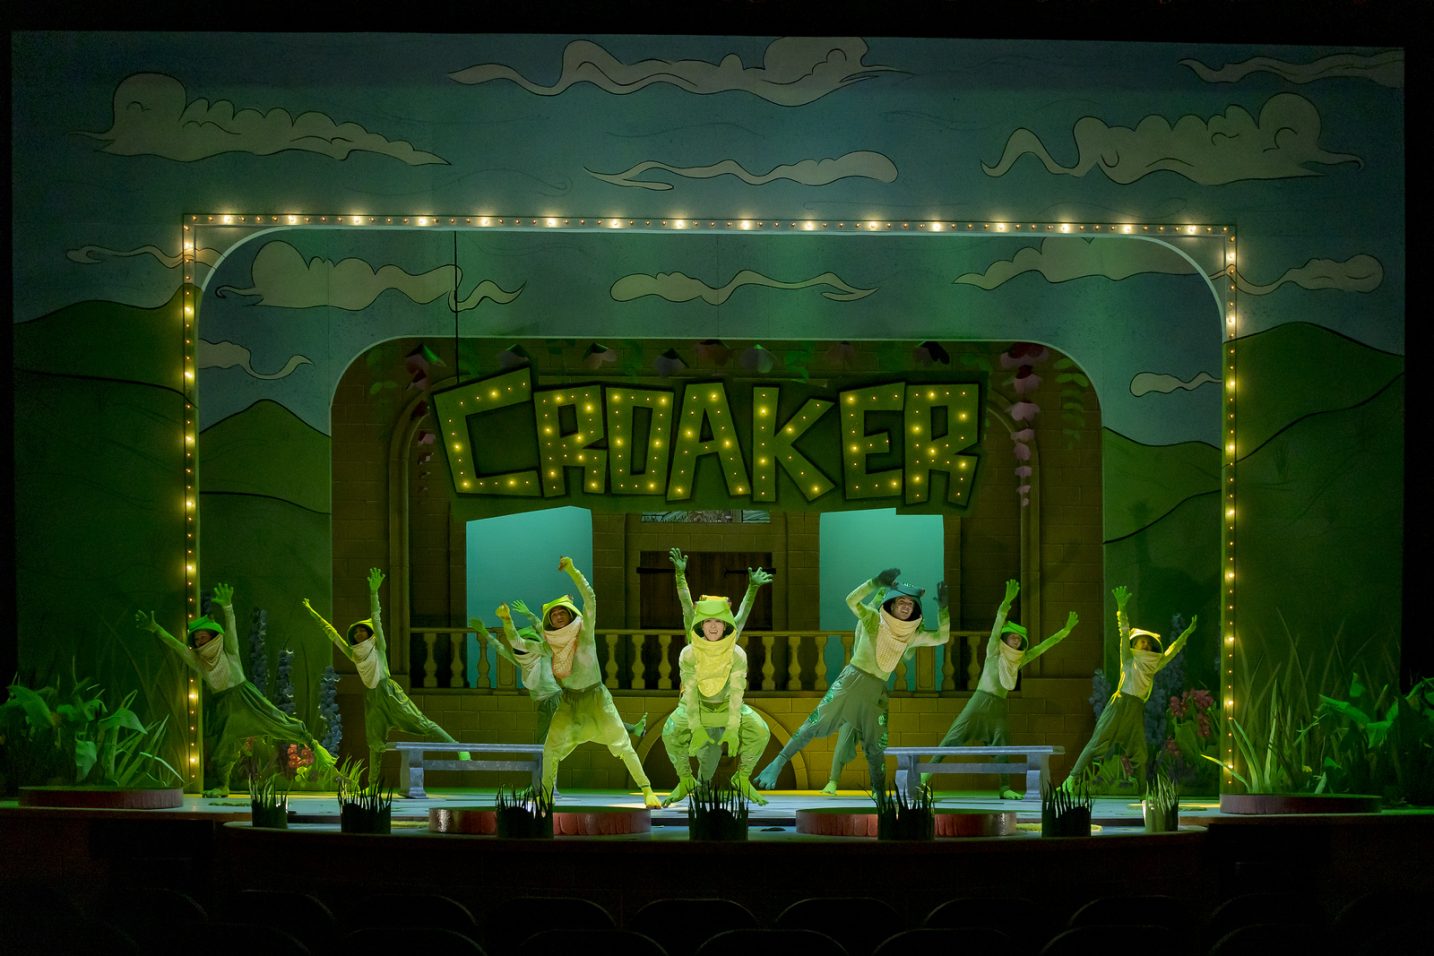 croaker sign in light up letters, actors dressed in frog costumes